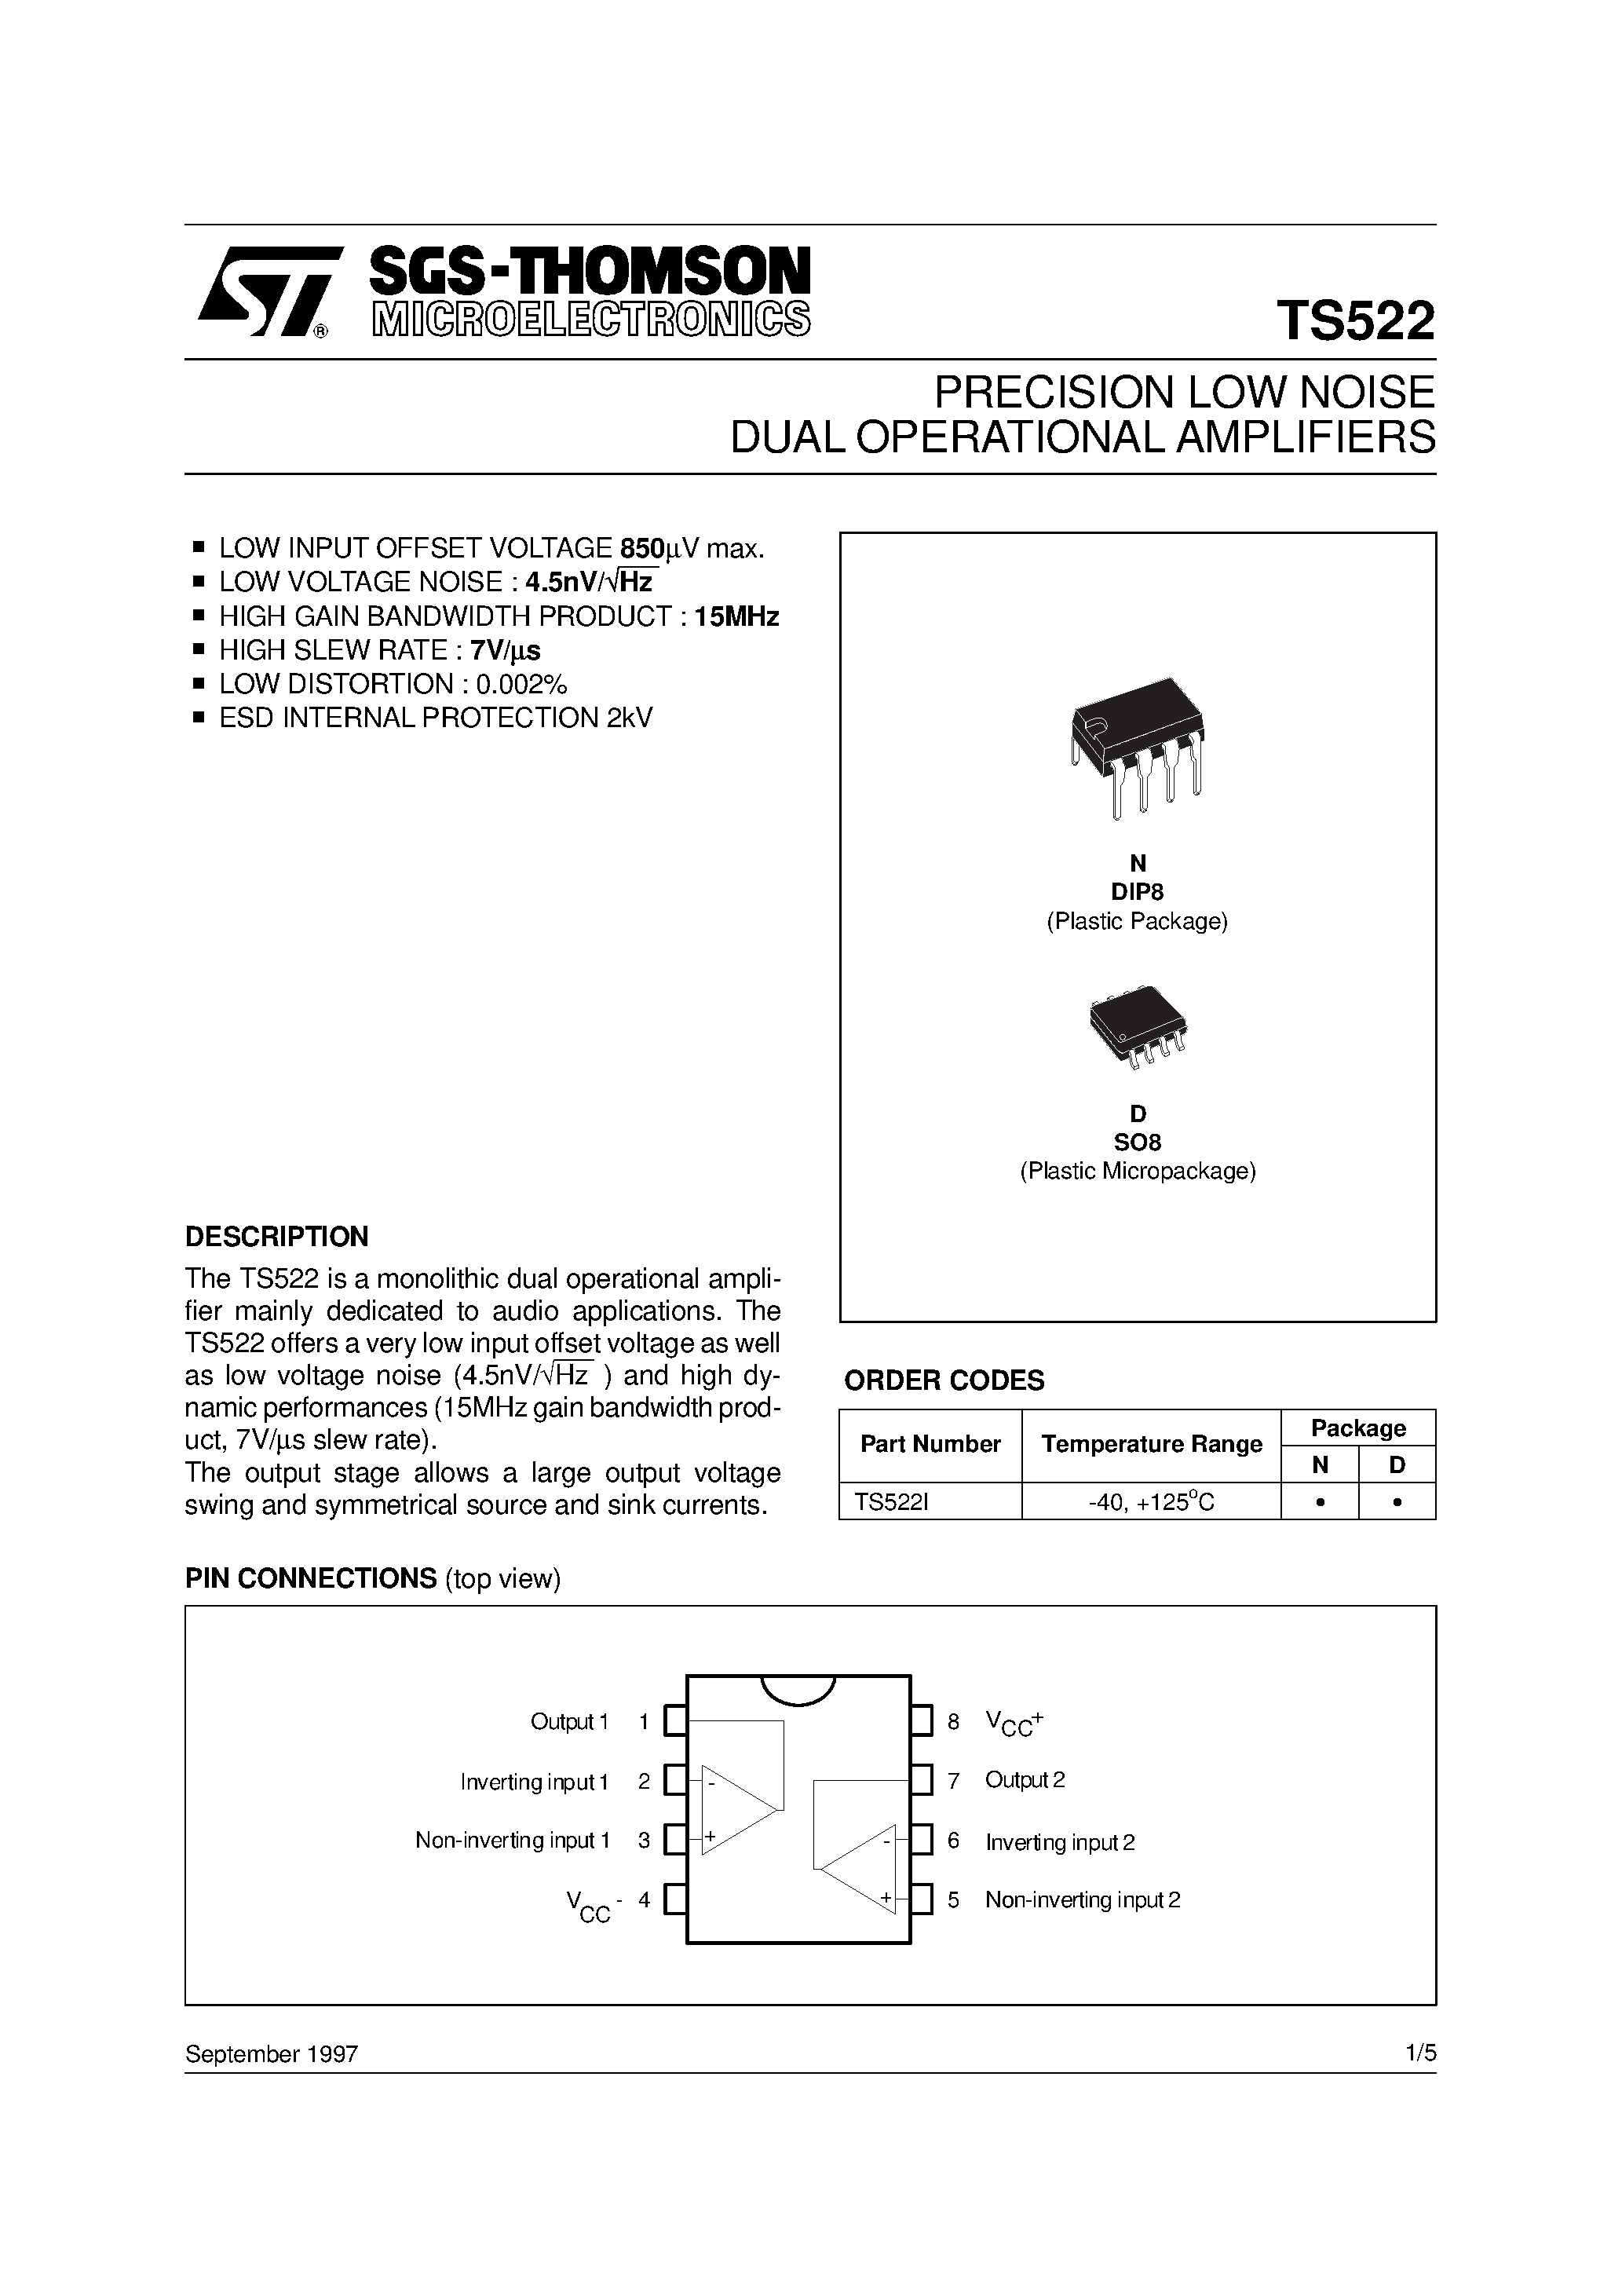 Datasheet TS522ID - PRECISION LOW NOISE DUAL OPERATIONAL AMPLIFIERS page 1